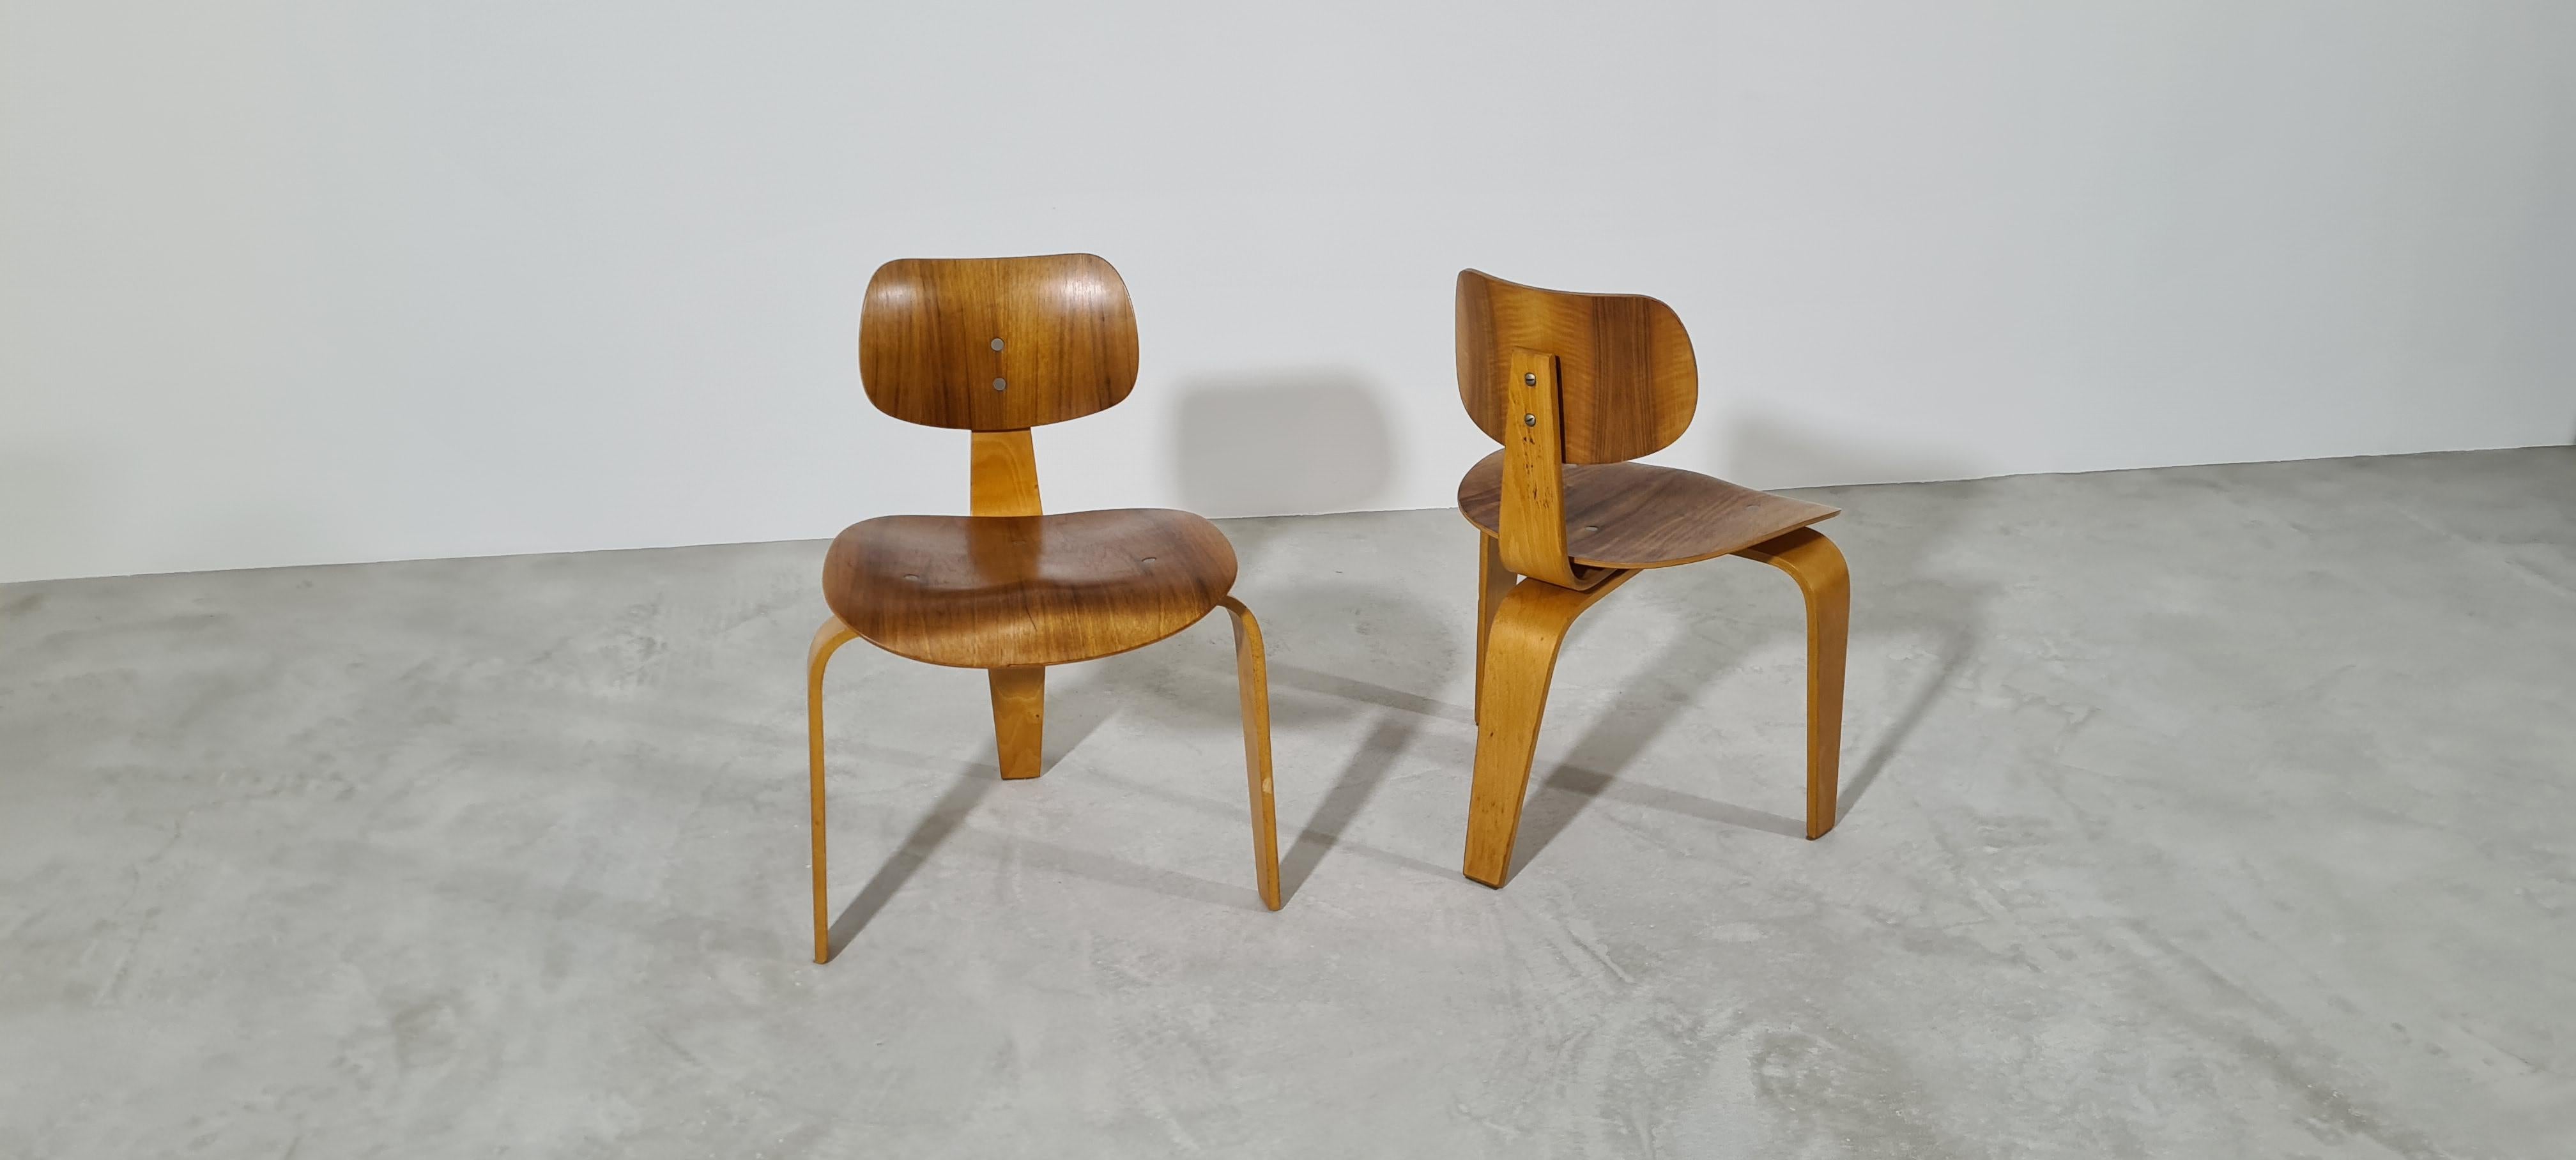 19th Century Pair of Egon Eiermann Chairs Se 42/Se 3 produced by Wilde & Spieth in 1950 For Sale